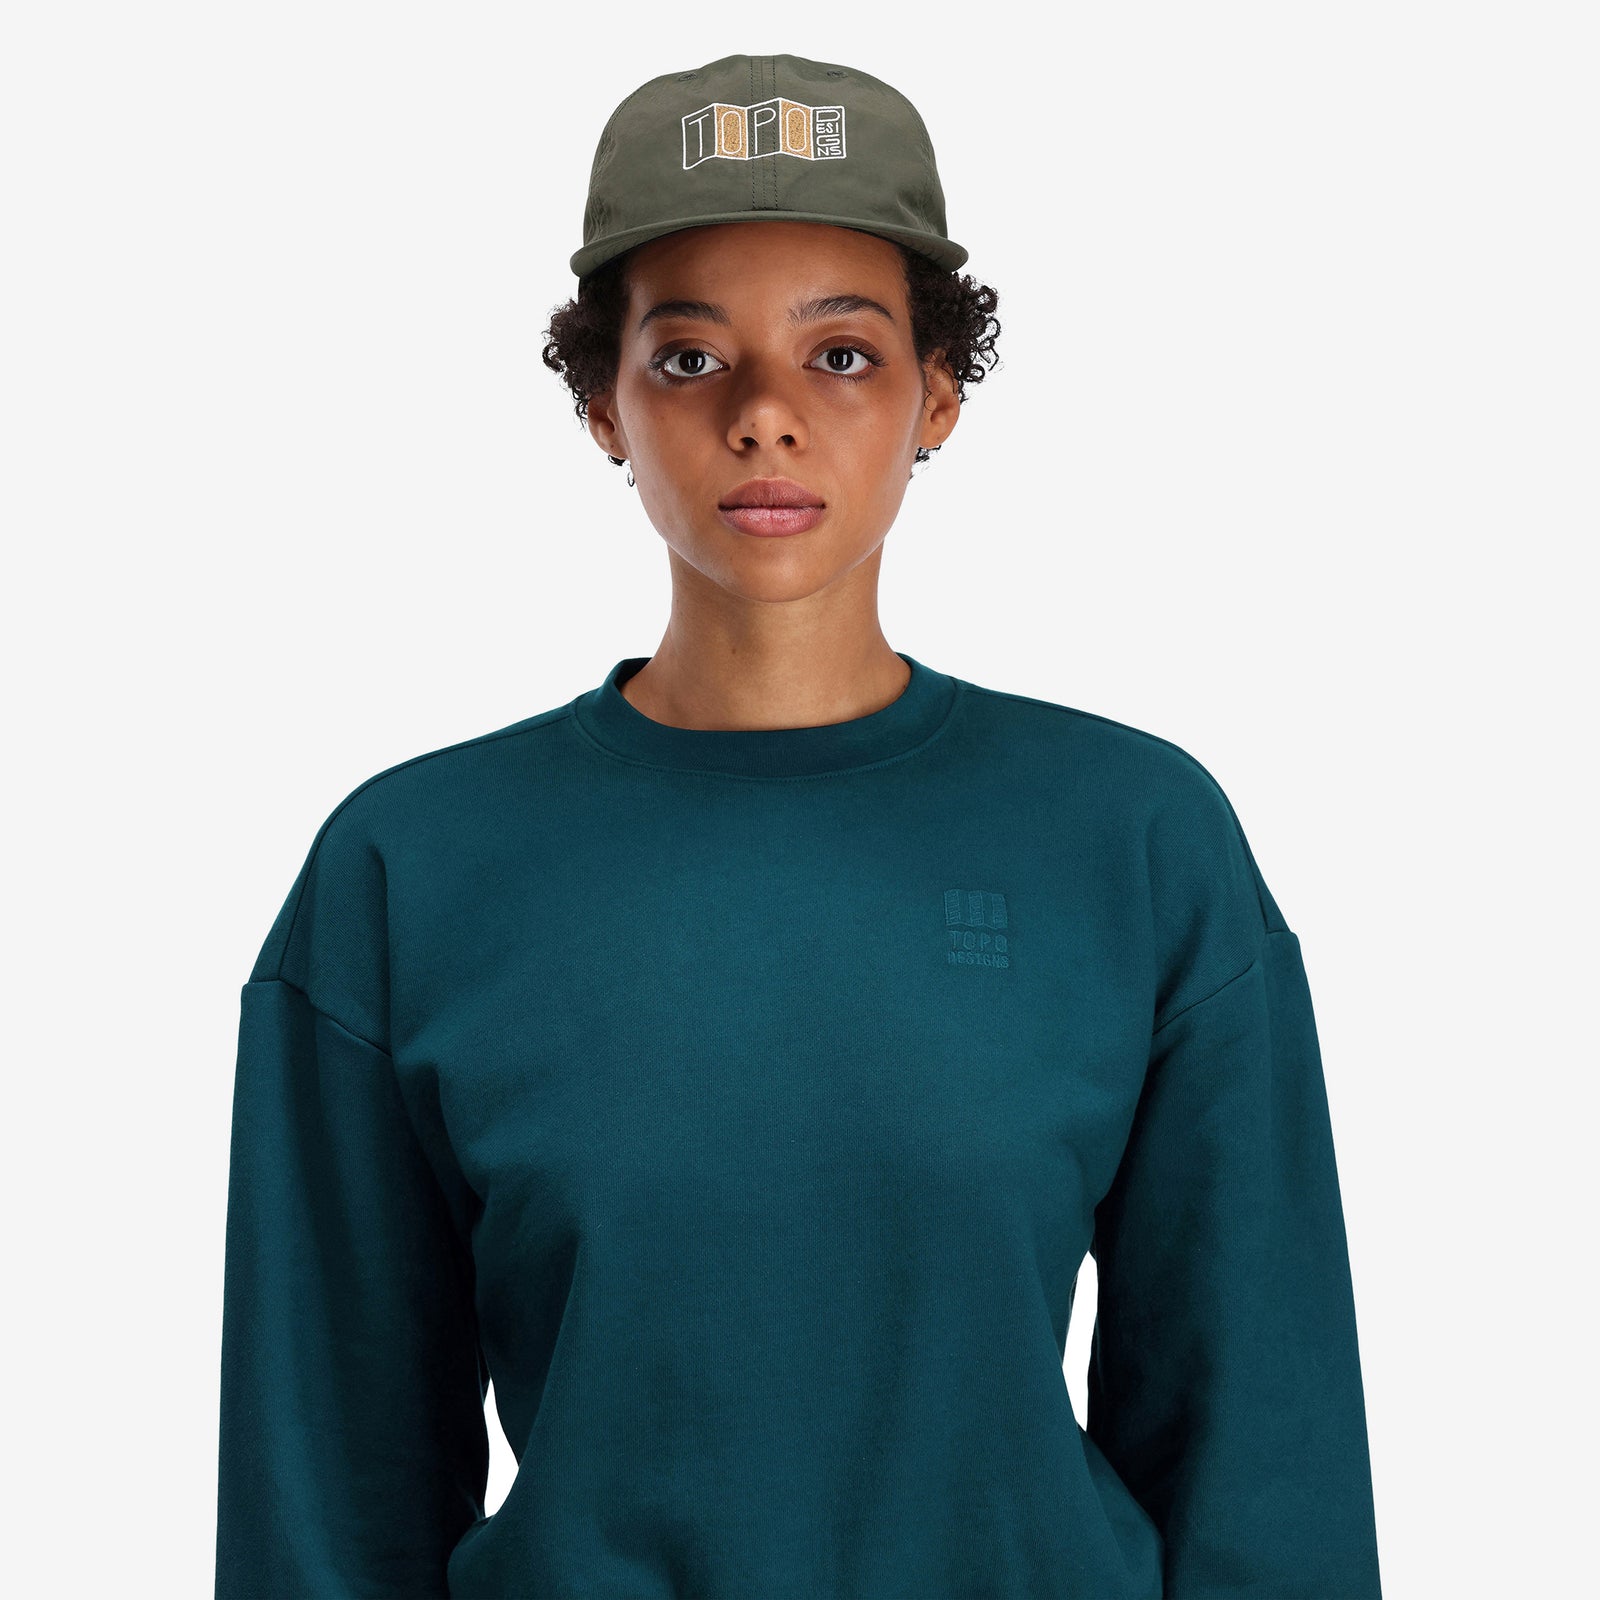 General shot, on model, front photo of Topo Designs Nylon Ball Cap Stacked Map embroidered logo hat in "forest" green